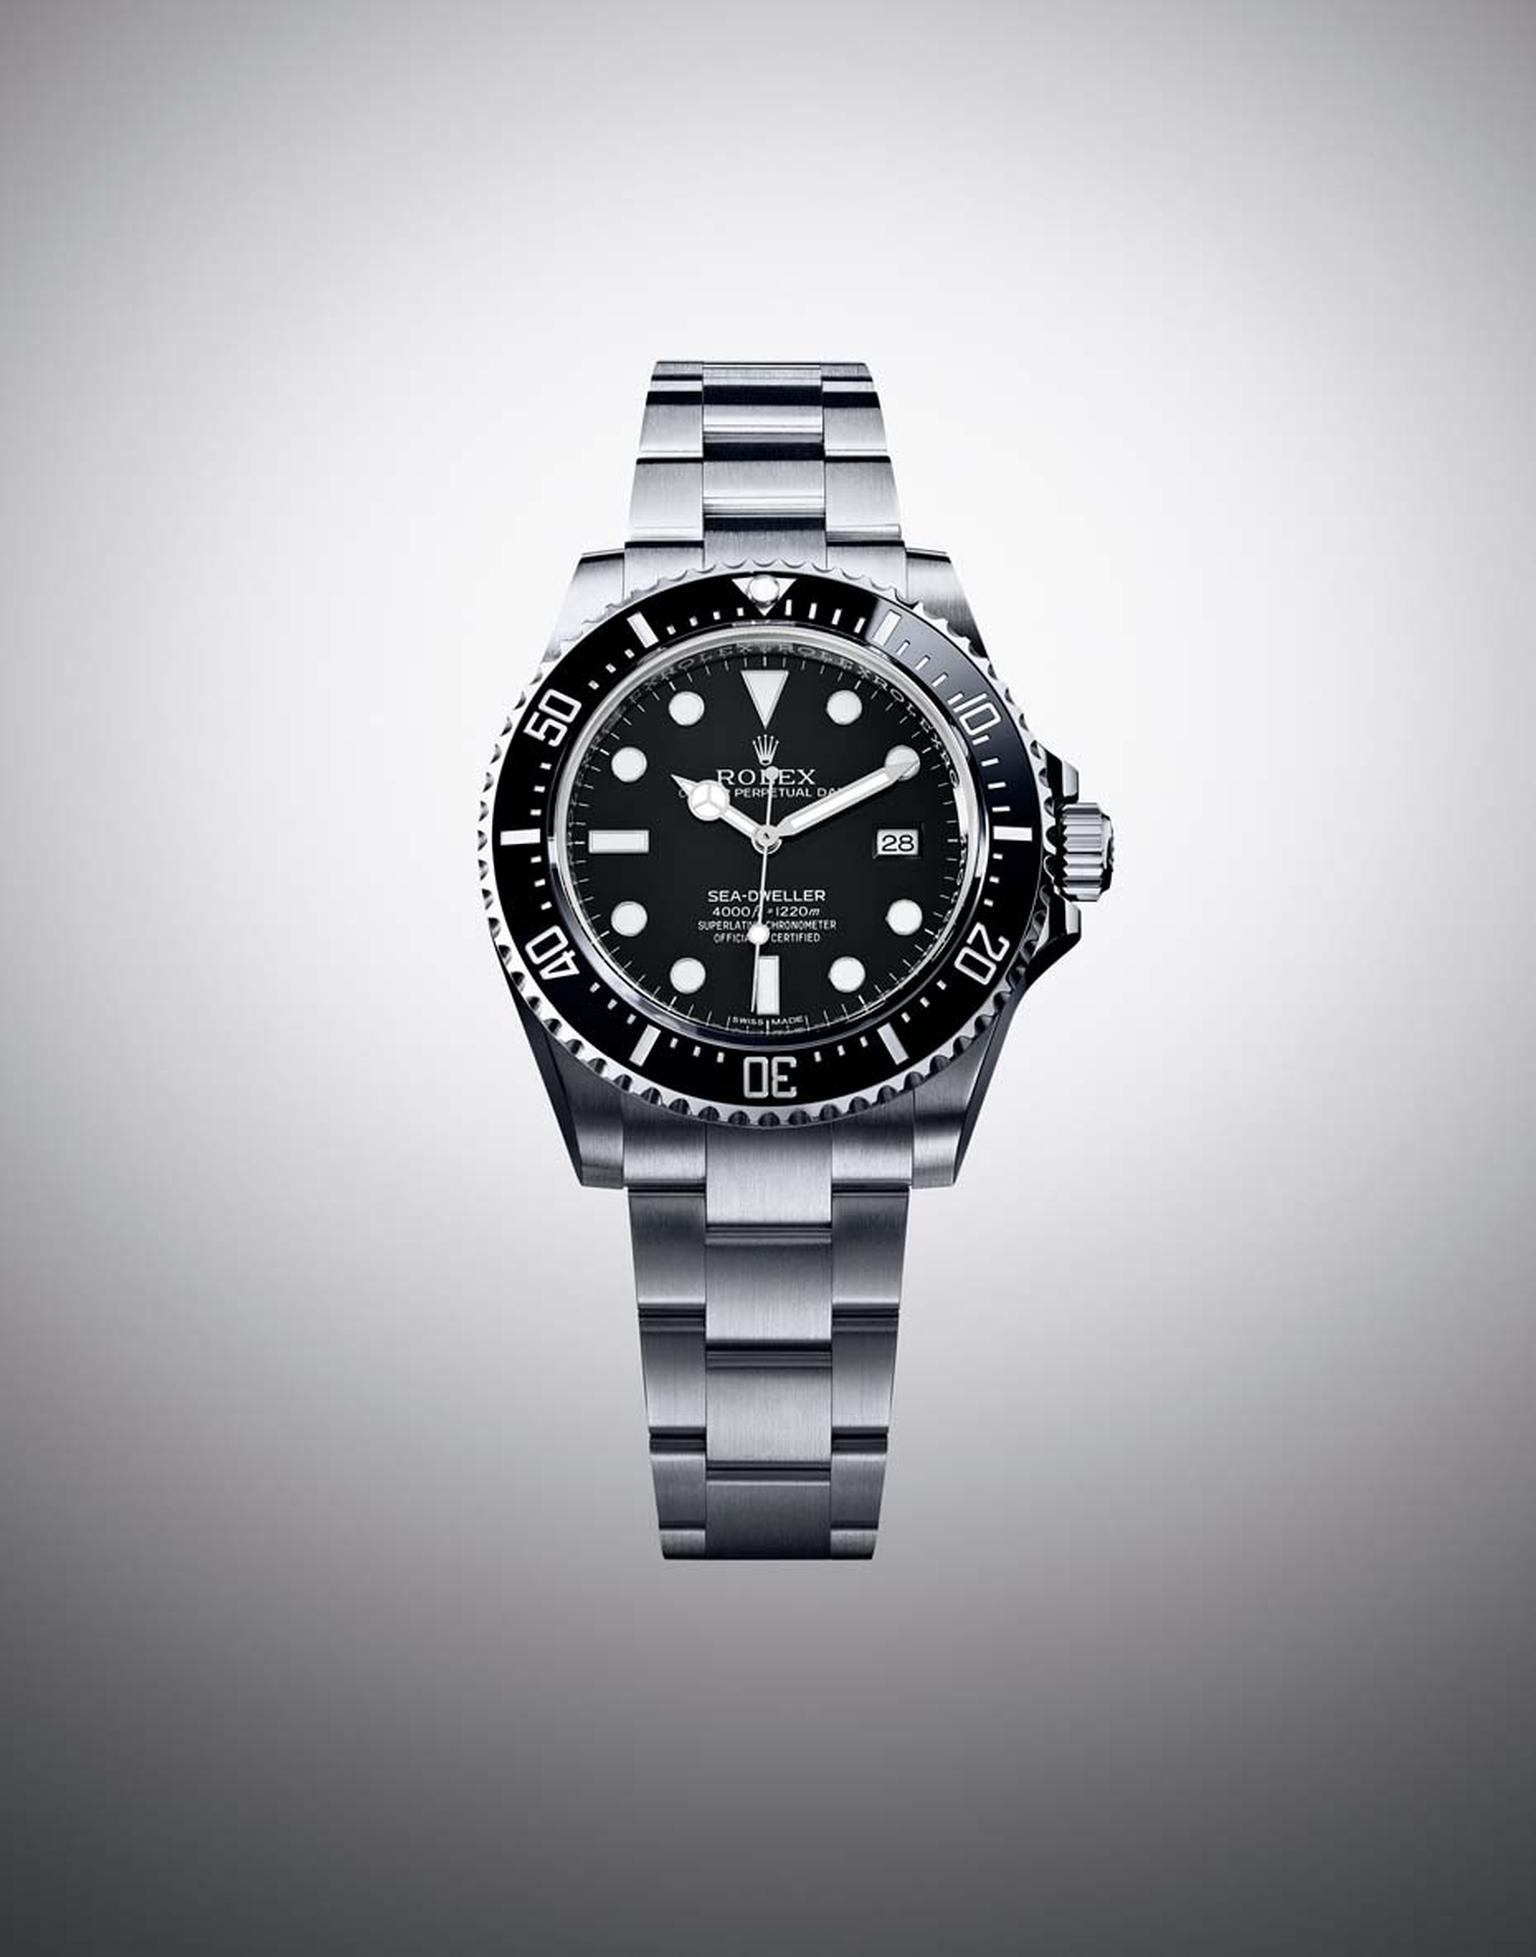 The Rolex Oyster Perpetual Sea-Dweller 4000 watch is a contemporary version of the legendary 1967 Sea-Dweller. This 40mm professional diver’s watch can fathom depths of 1,200m. Fitted with Rolex calibre 3135, the self-winding mechanical movement is, like 